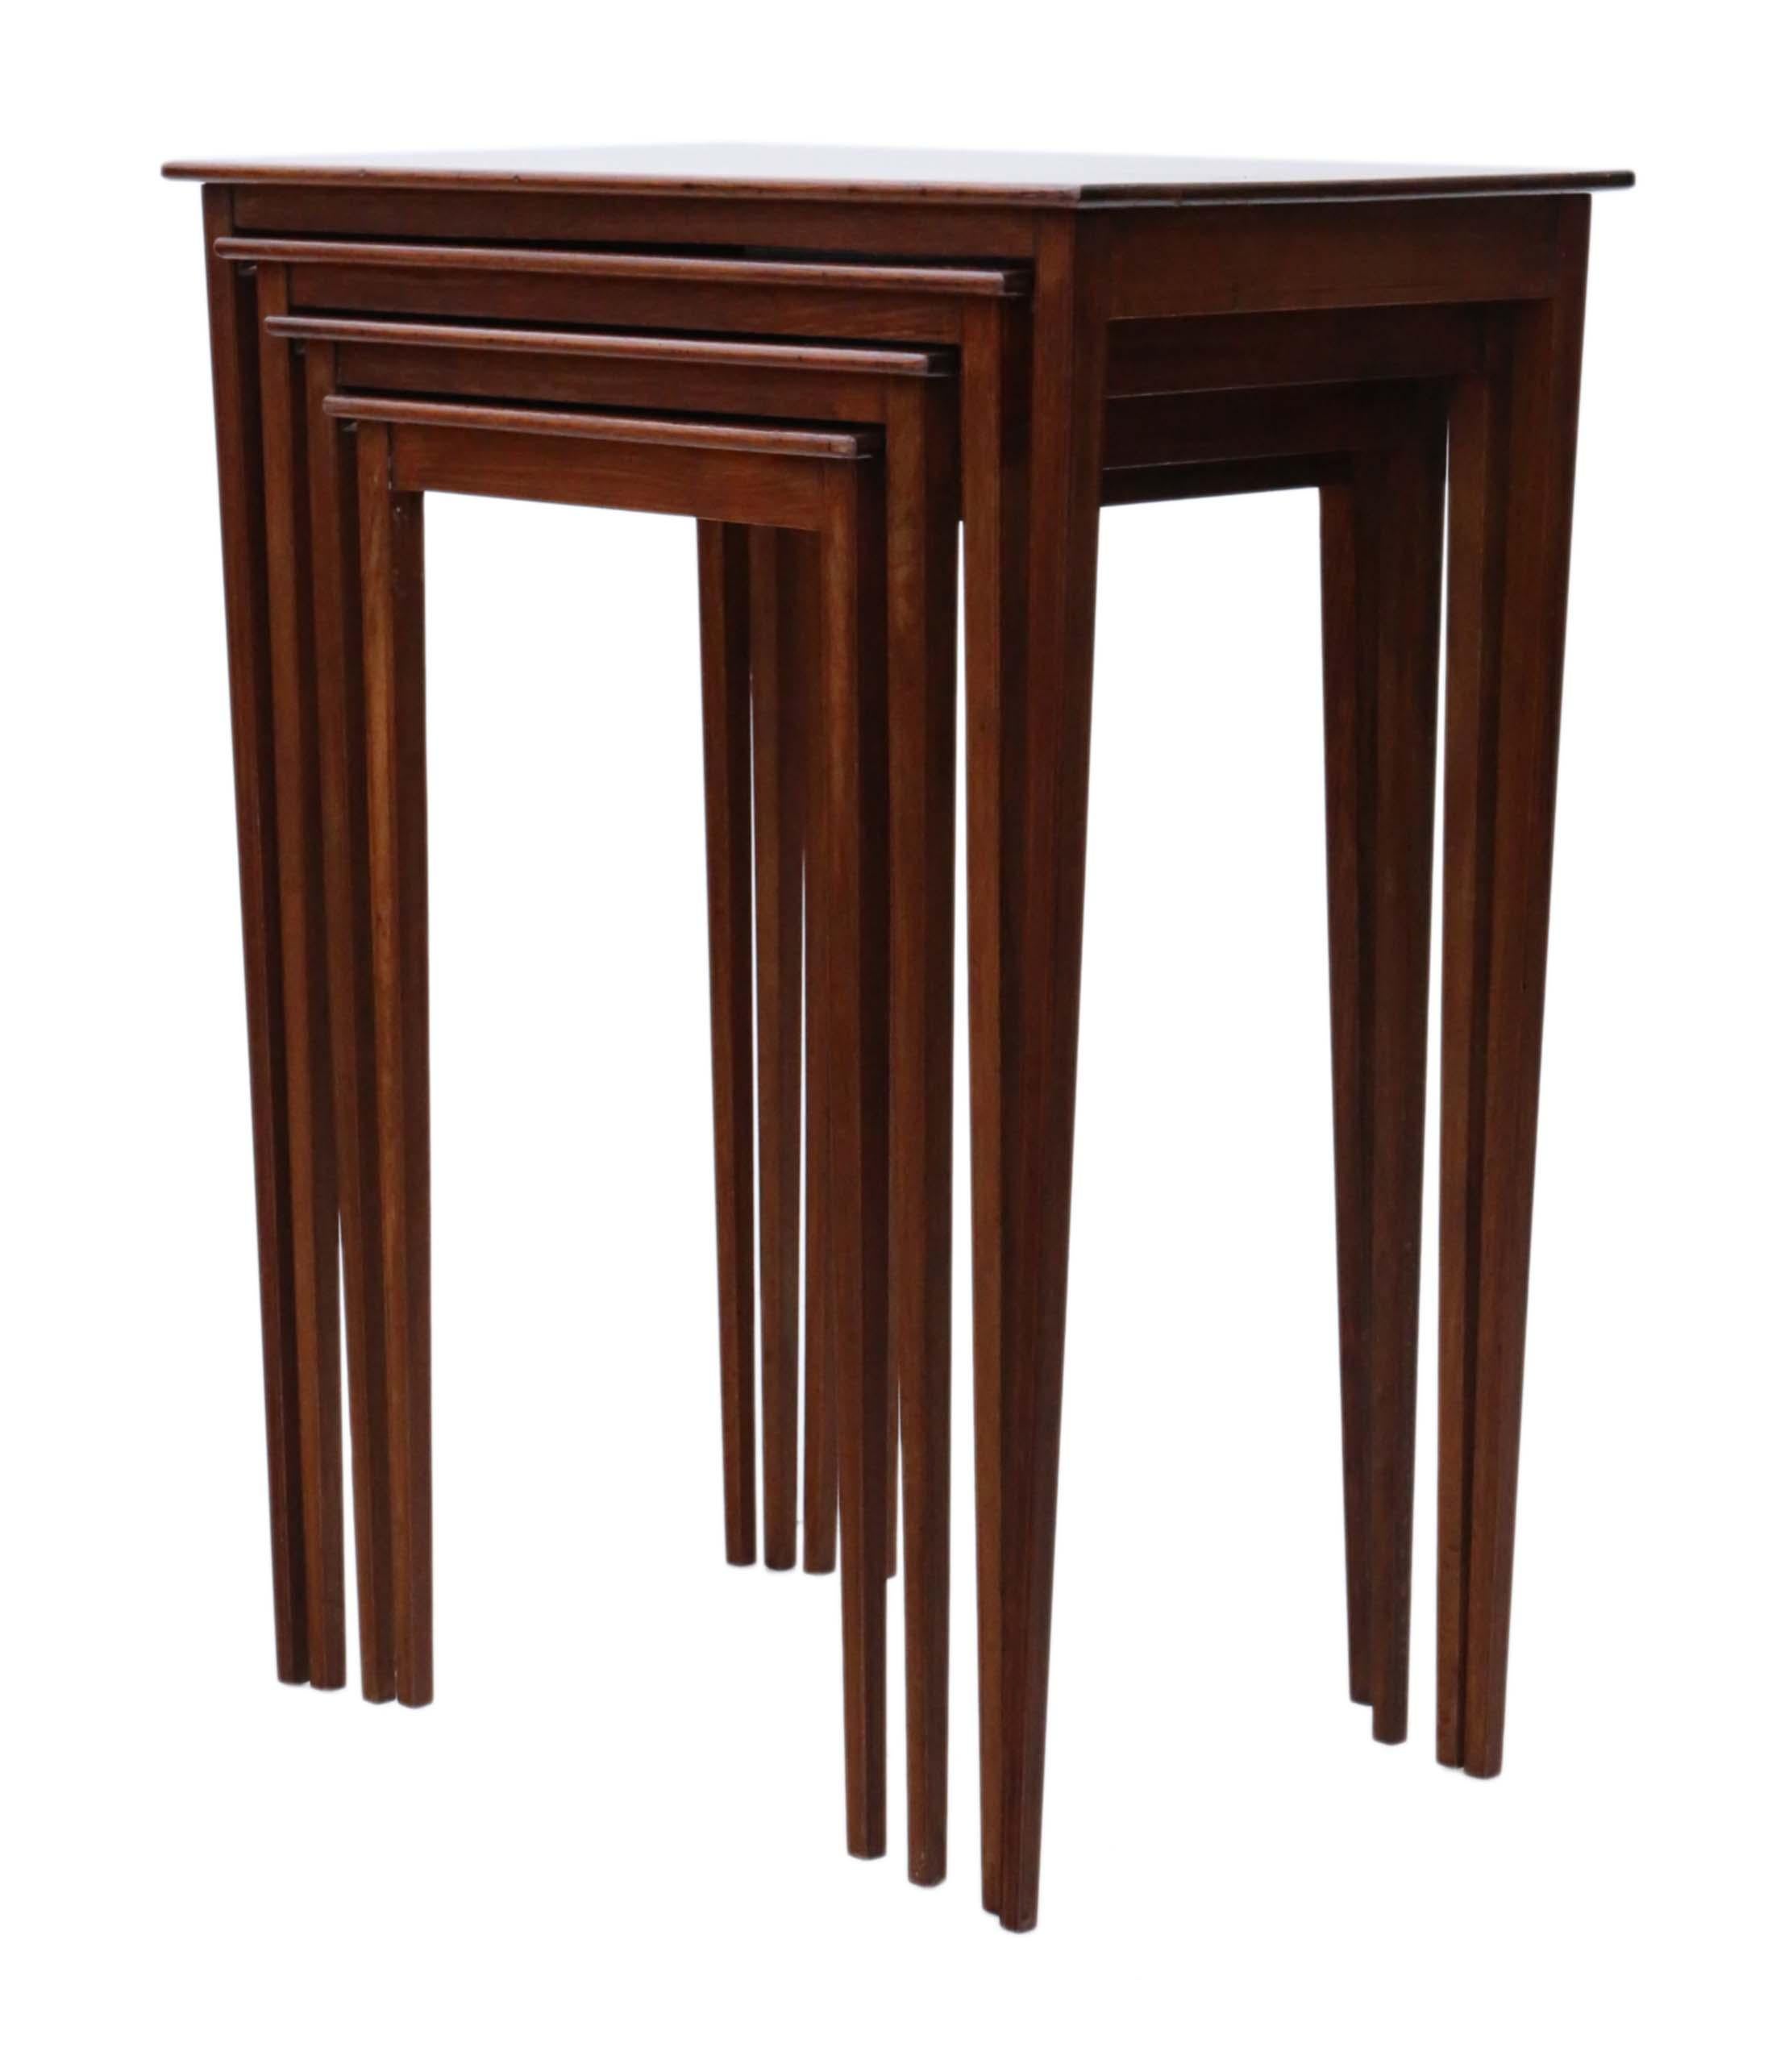 Antique fine quality inlaid mahogany nest of 4 tables C1900 RJ Horner New York.
 
Very attractive, with lovely proportions and styling. Recently restored to a good standard.
 
No loose joints or woodworm.
Good age, colour and patina.

Overall